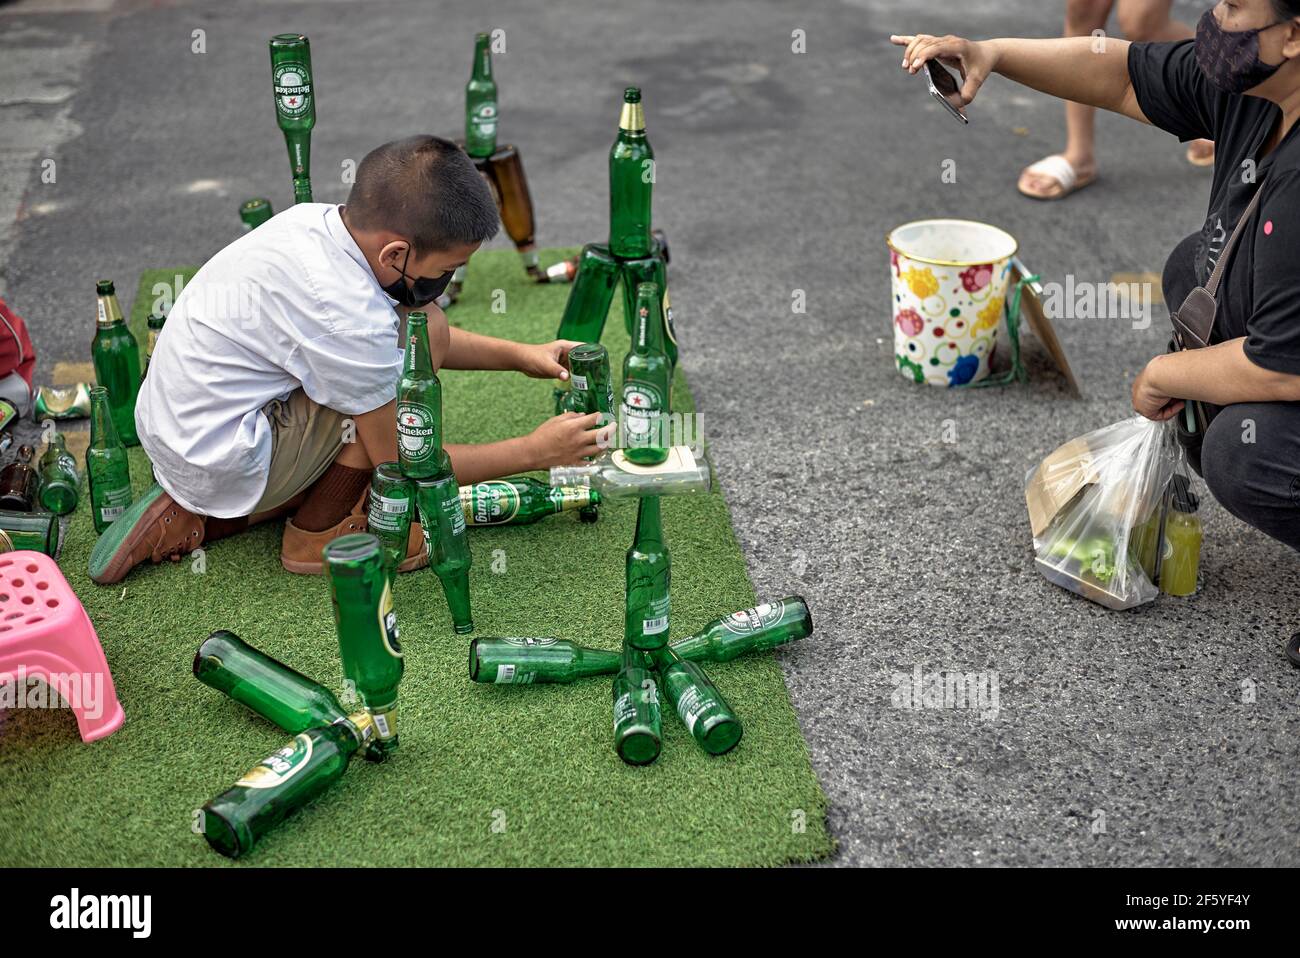 Imaginative child. Young boy arranging and balancing beer bottles trick to earn money on the street. Thailand, Southeast Asia Stock Photo